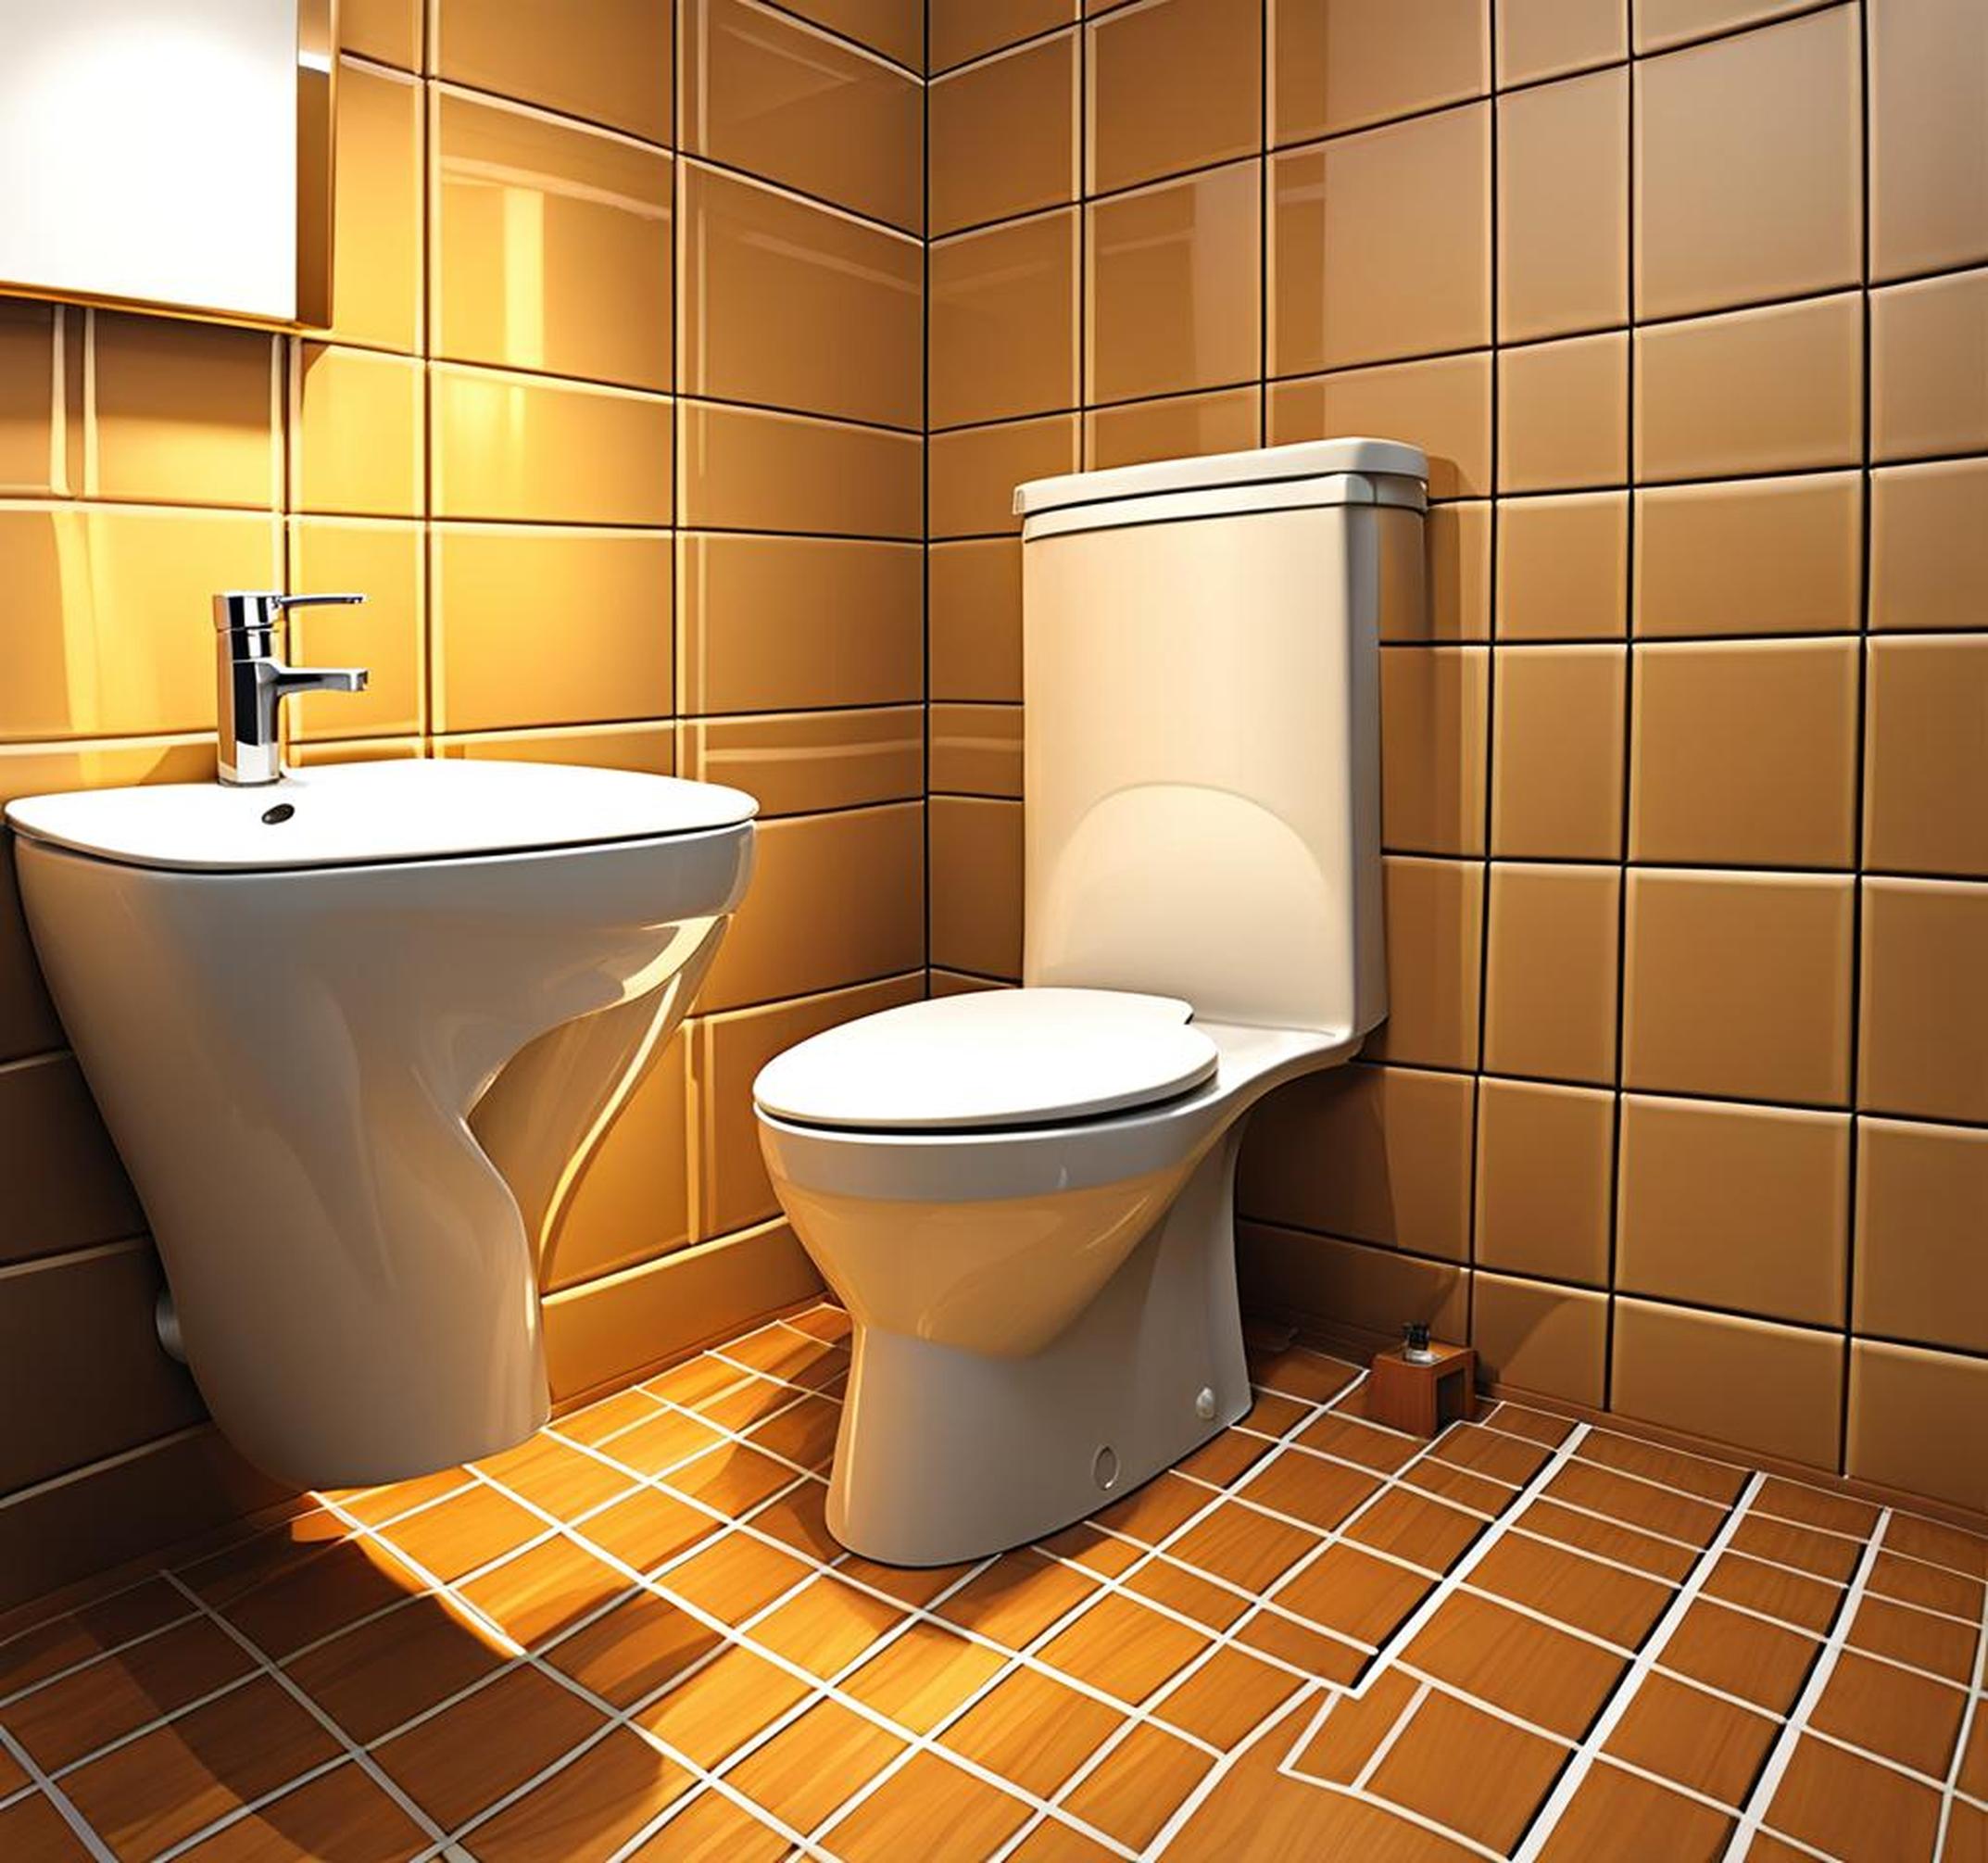 roughing in toilet dimensions